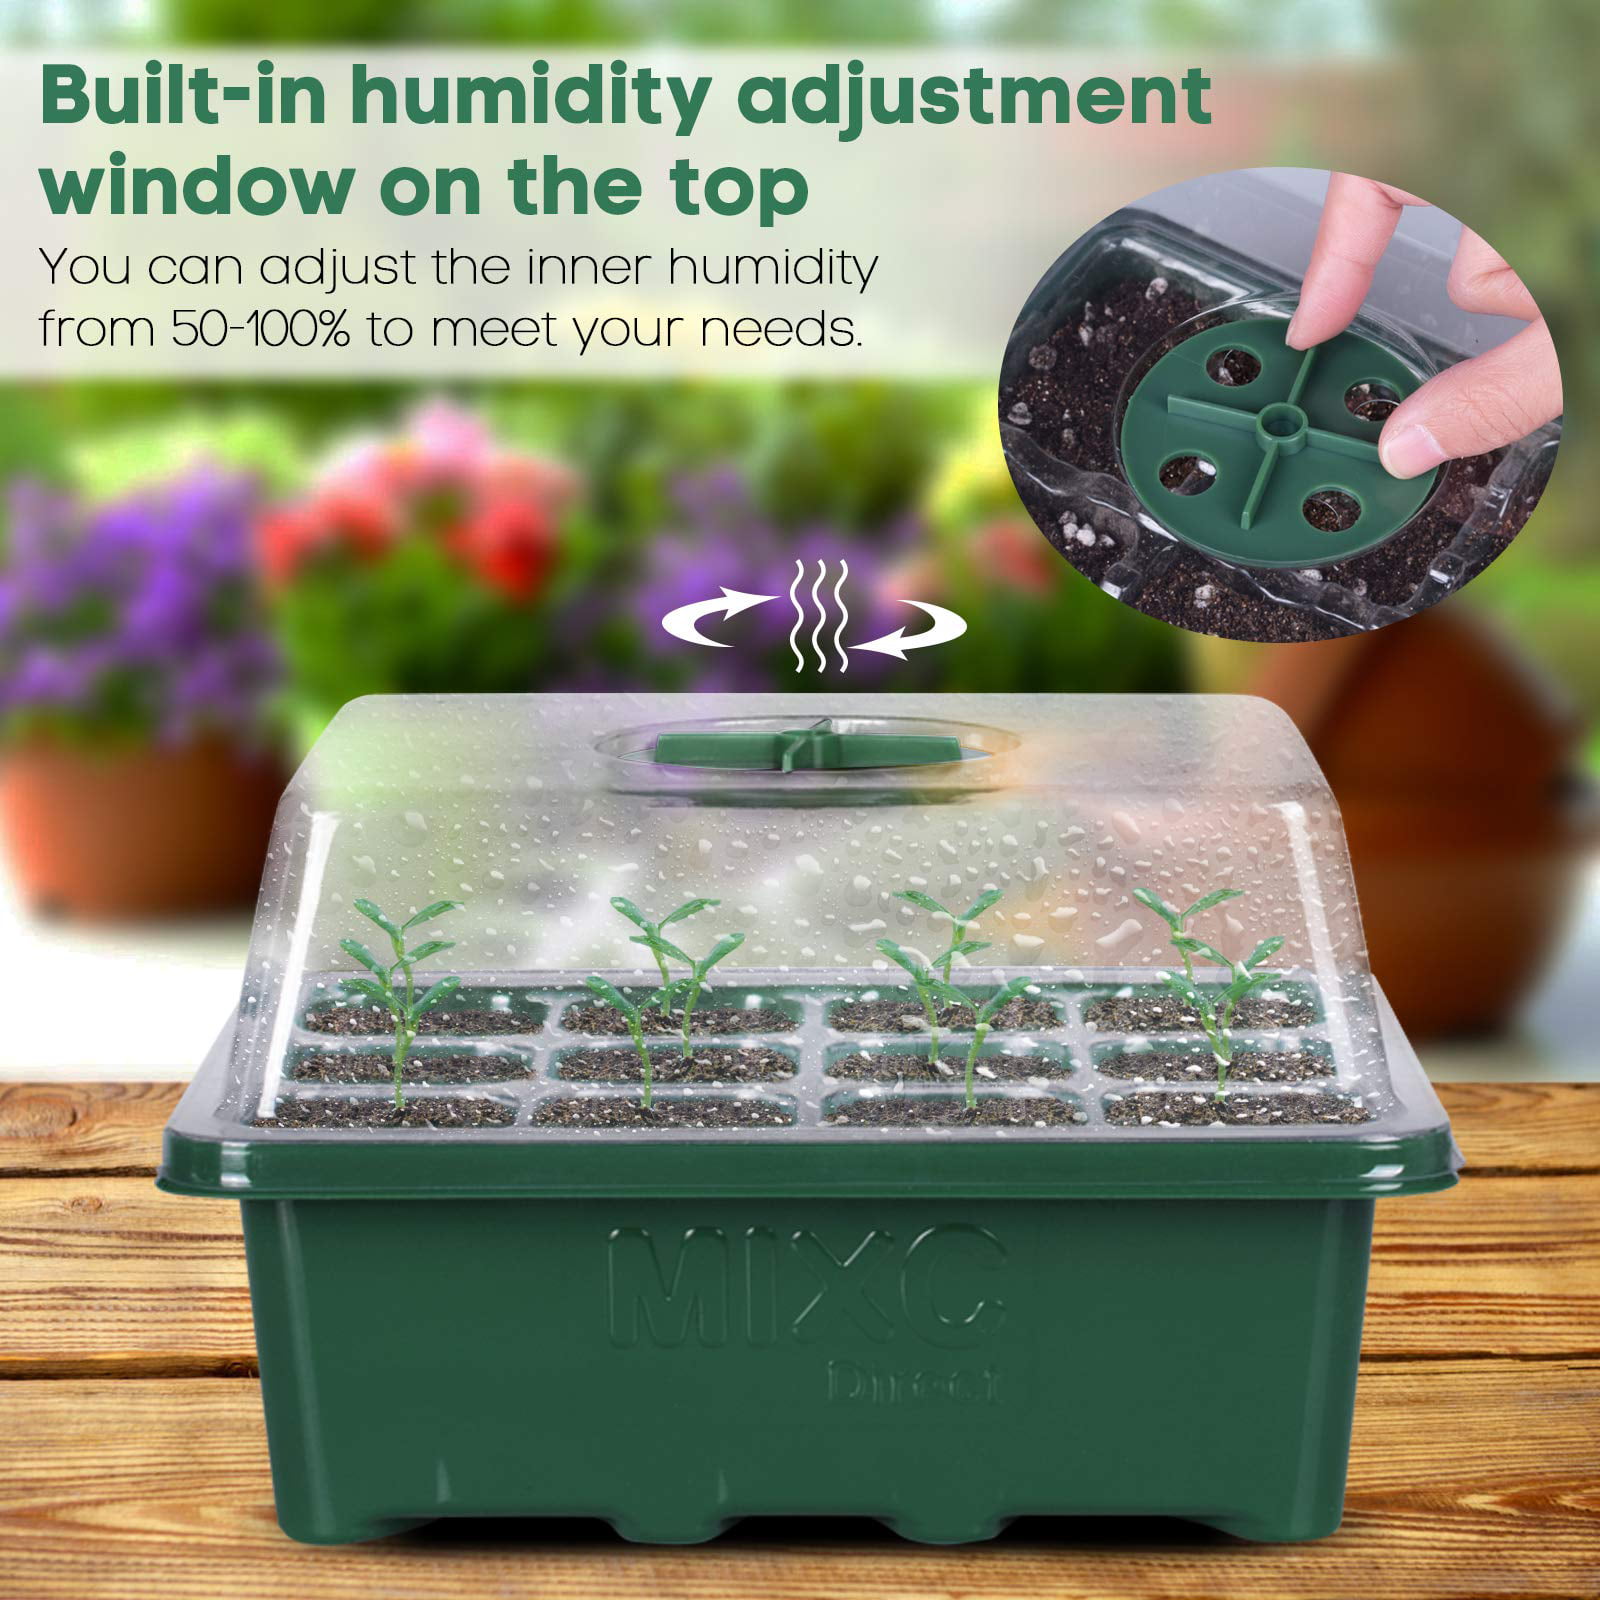 Seed starter tray Seed starter kit 10 Pack Seed starter humidity adjustable Seed starting mix with dome Seed starting trays for base greenhouse grow Seedling starter tray 12CellsperTray 5Green5Black